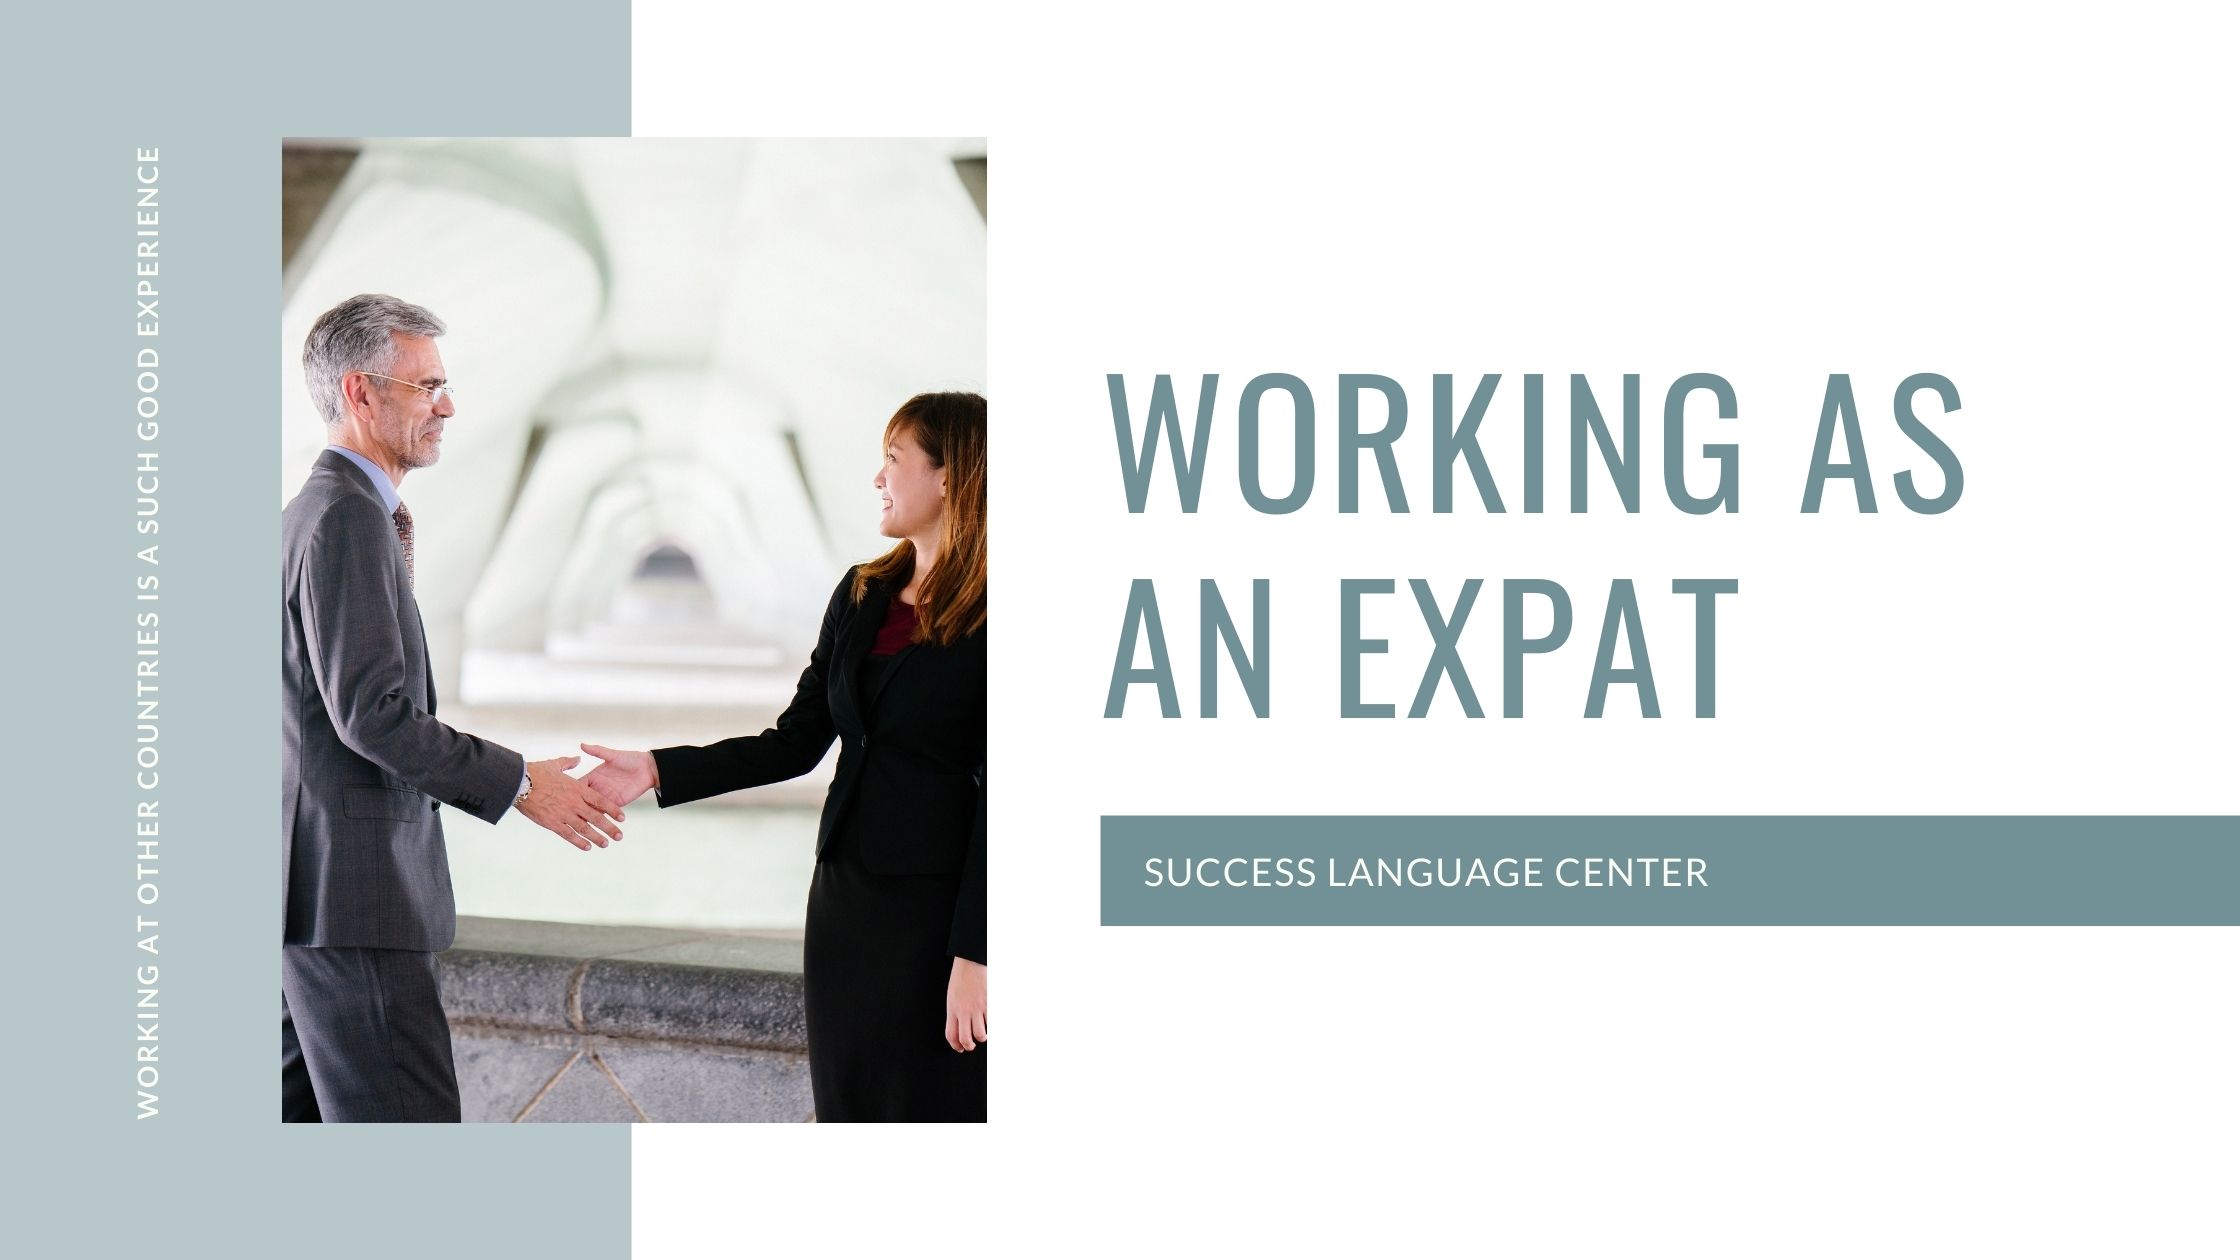 Working as an Expat